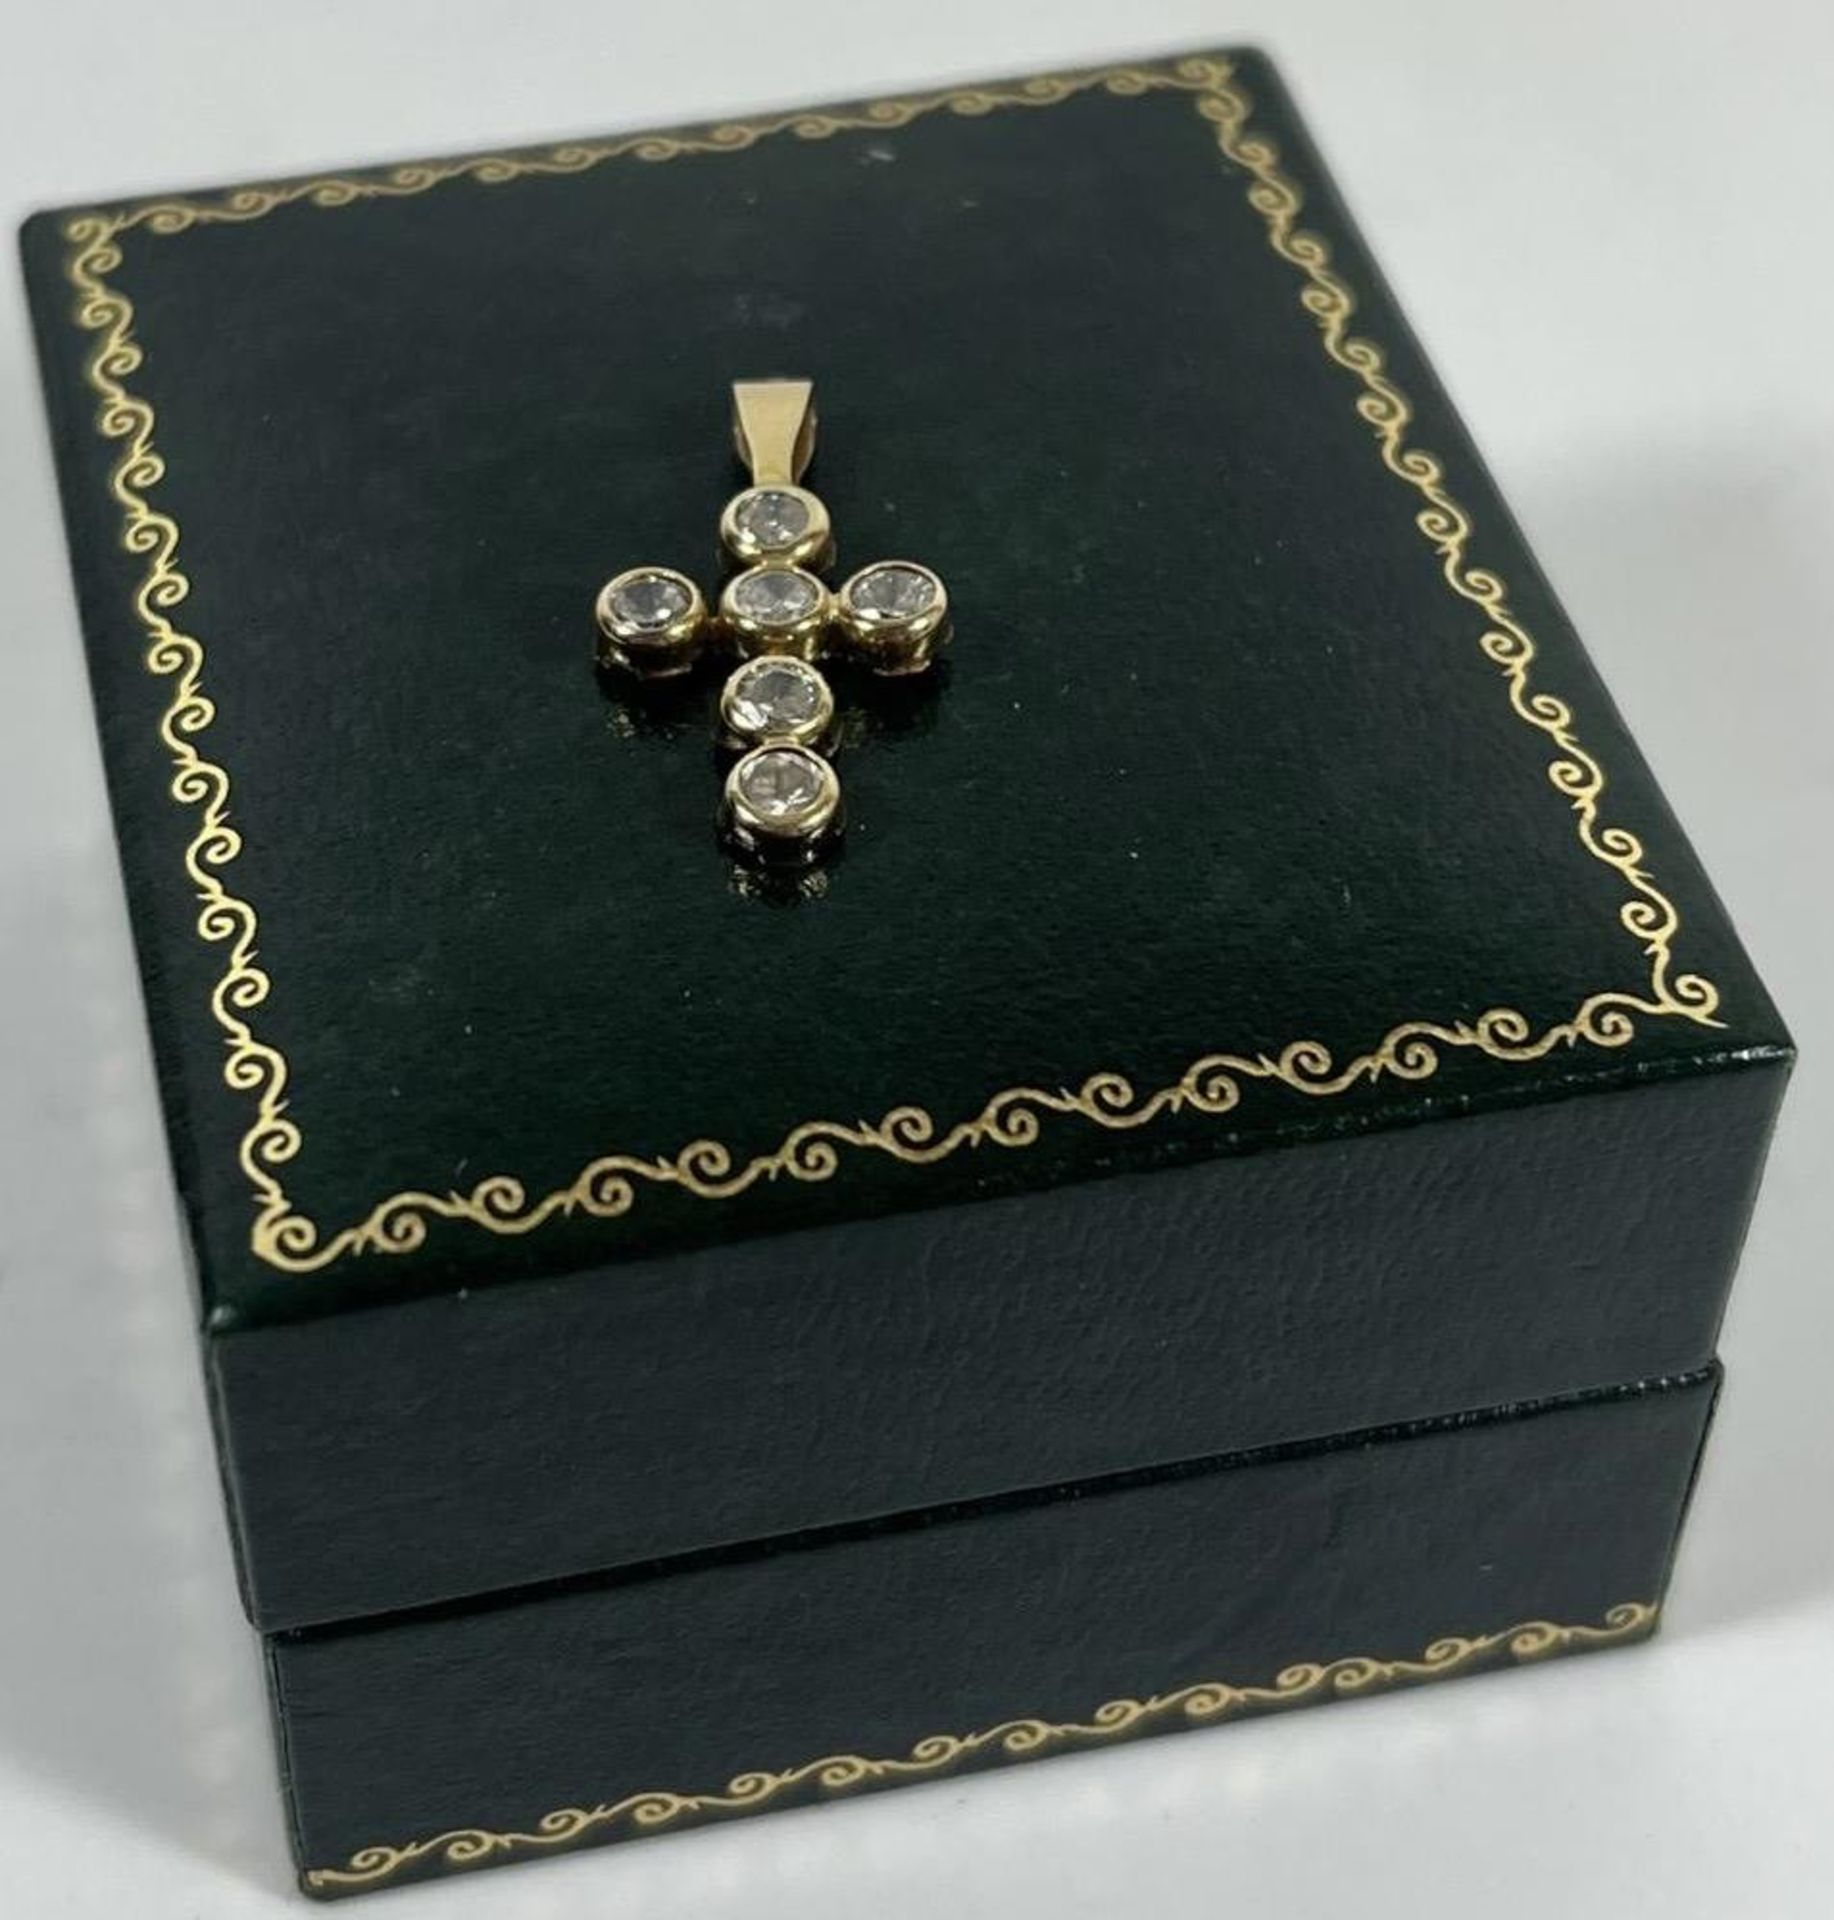 A 10CT YELLOW GOLD CRUCIFIX CROSS PENDANT WITH CLEAR STONES, WITH BOX